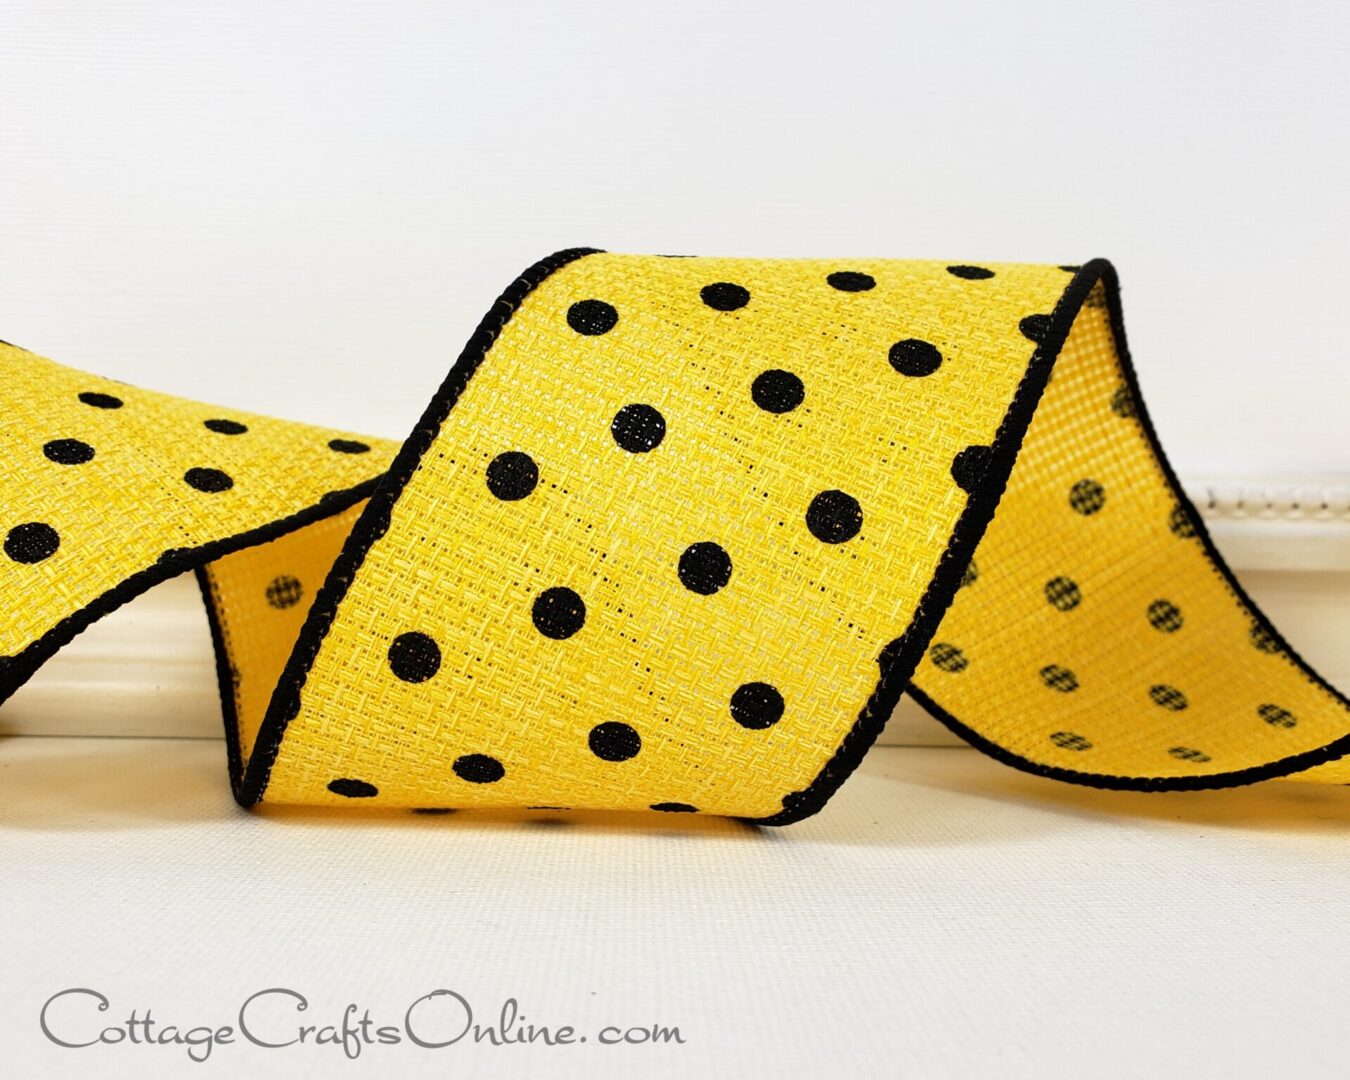 Small black dots on yellow open weave with black edge 2.5" wide wired ribbon from the Etsy shop of Cottage Crafts Online.